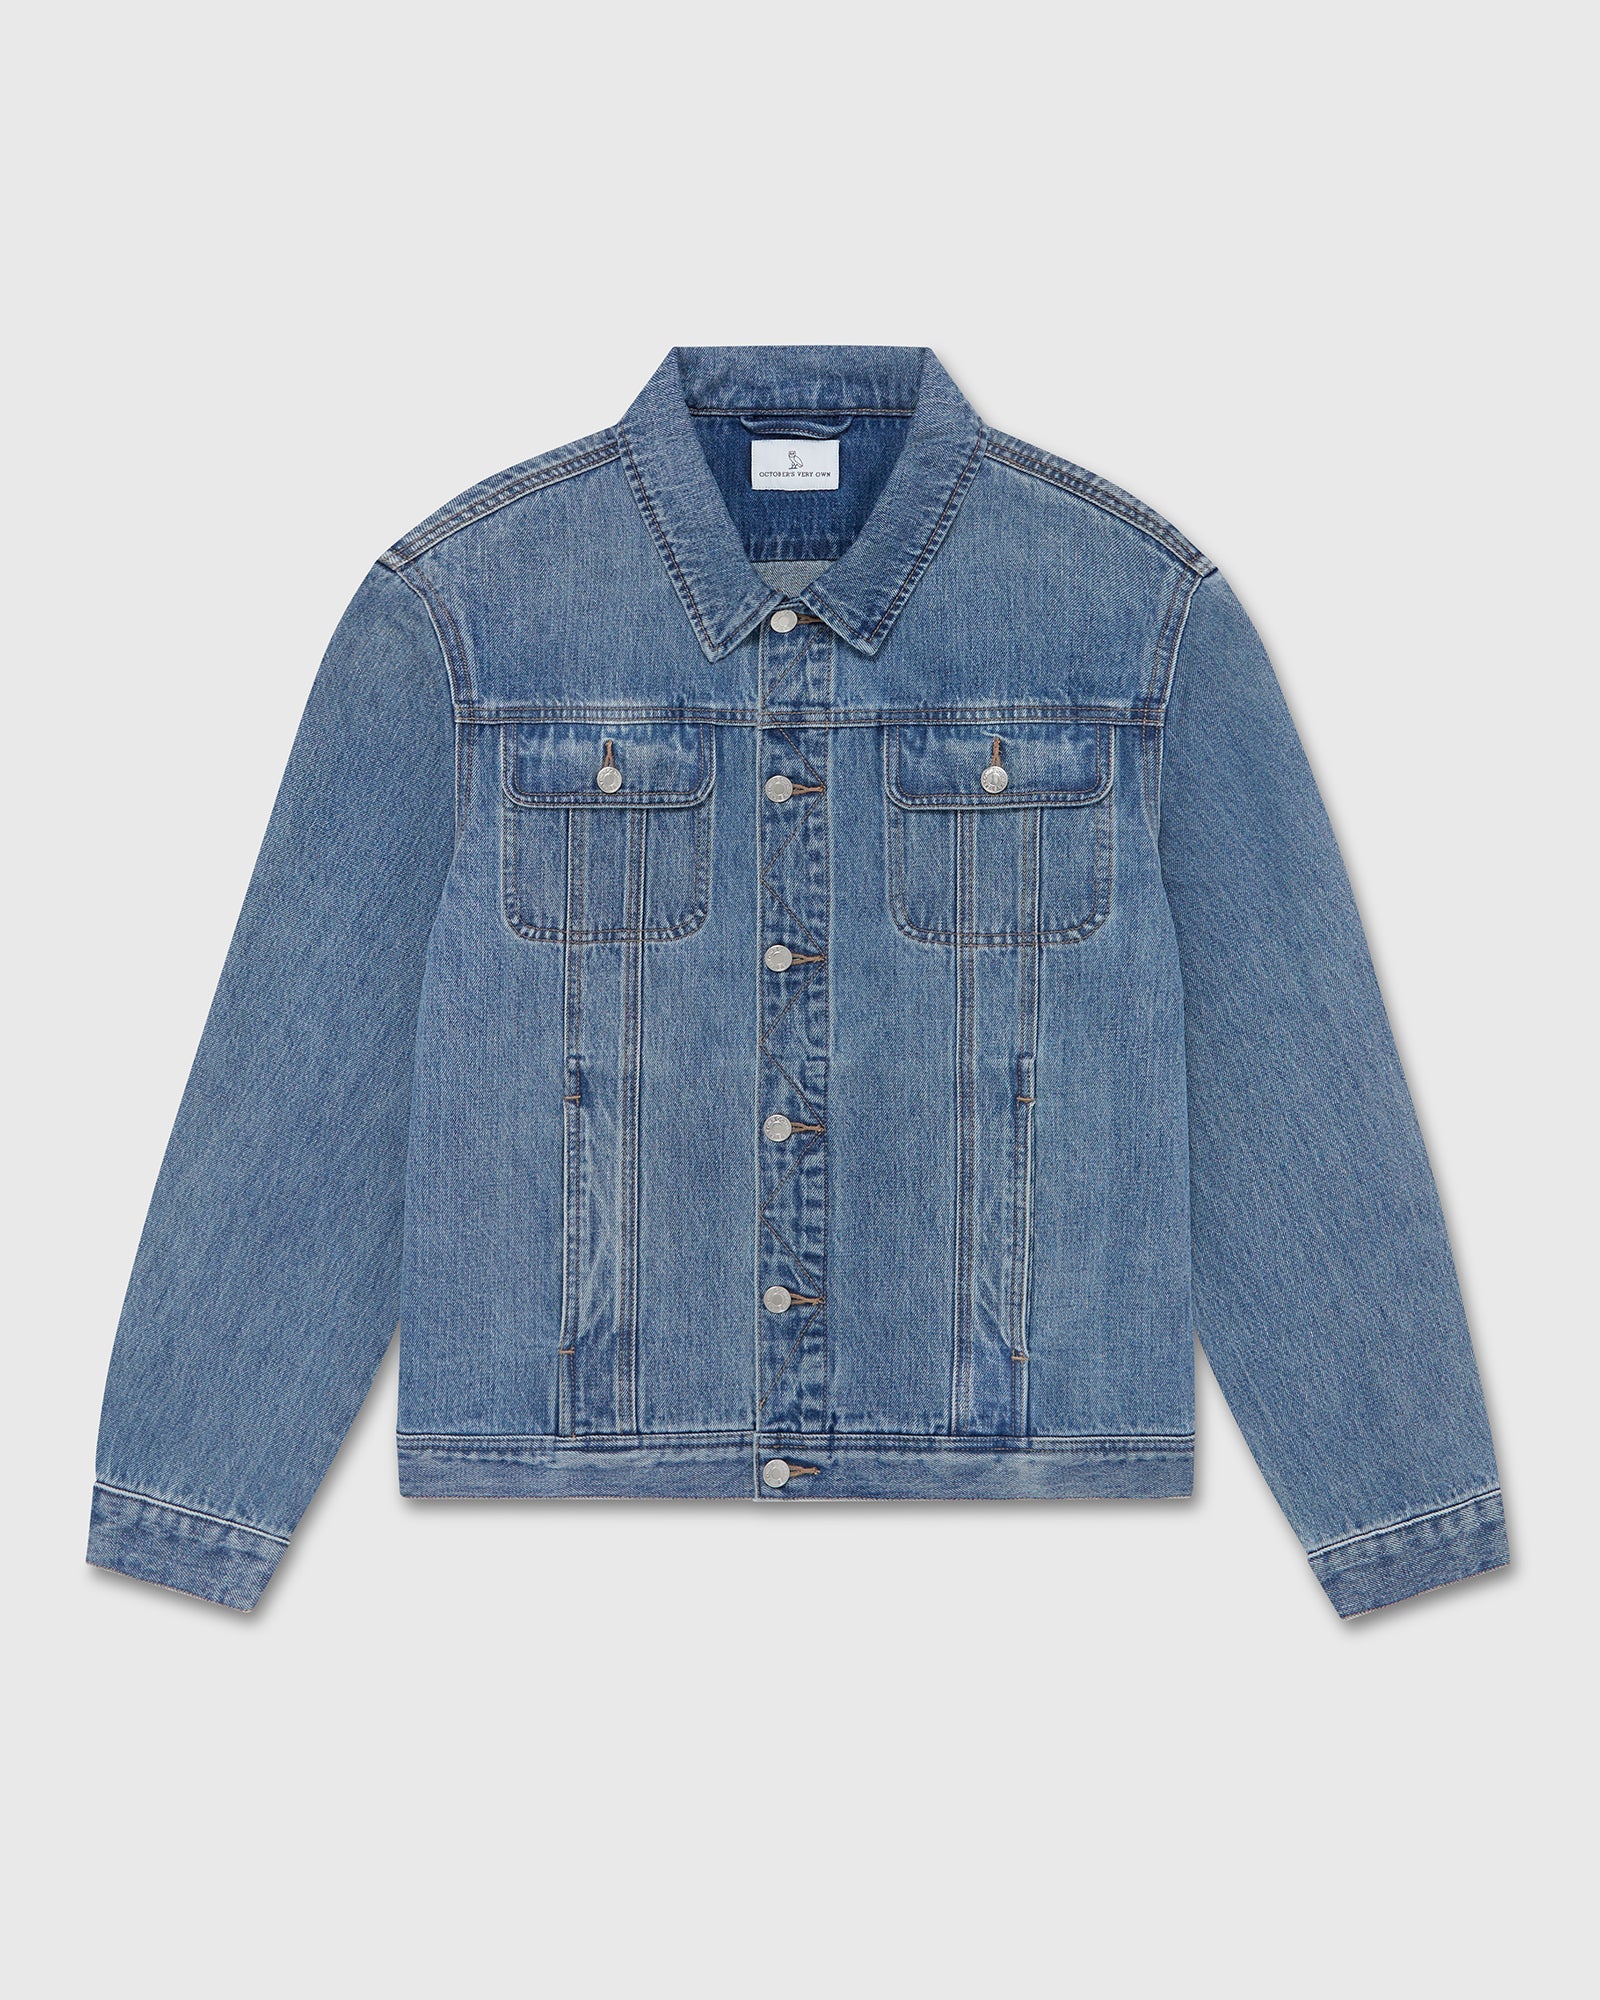 Thread & Supply Denim Trucker Jacket (Extended Sizes Available) at Dry Goods